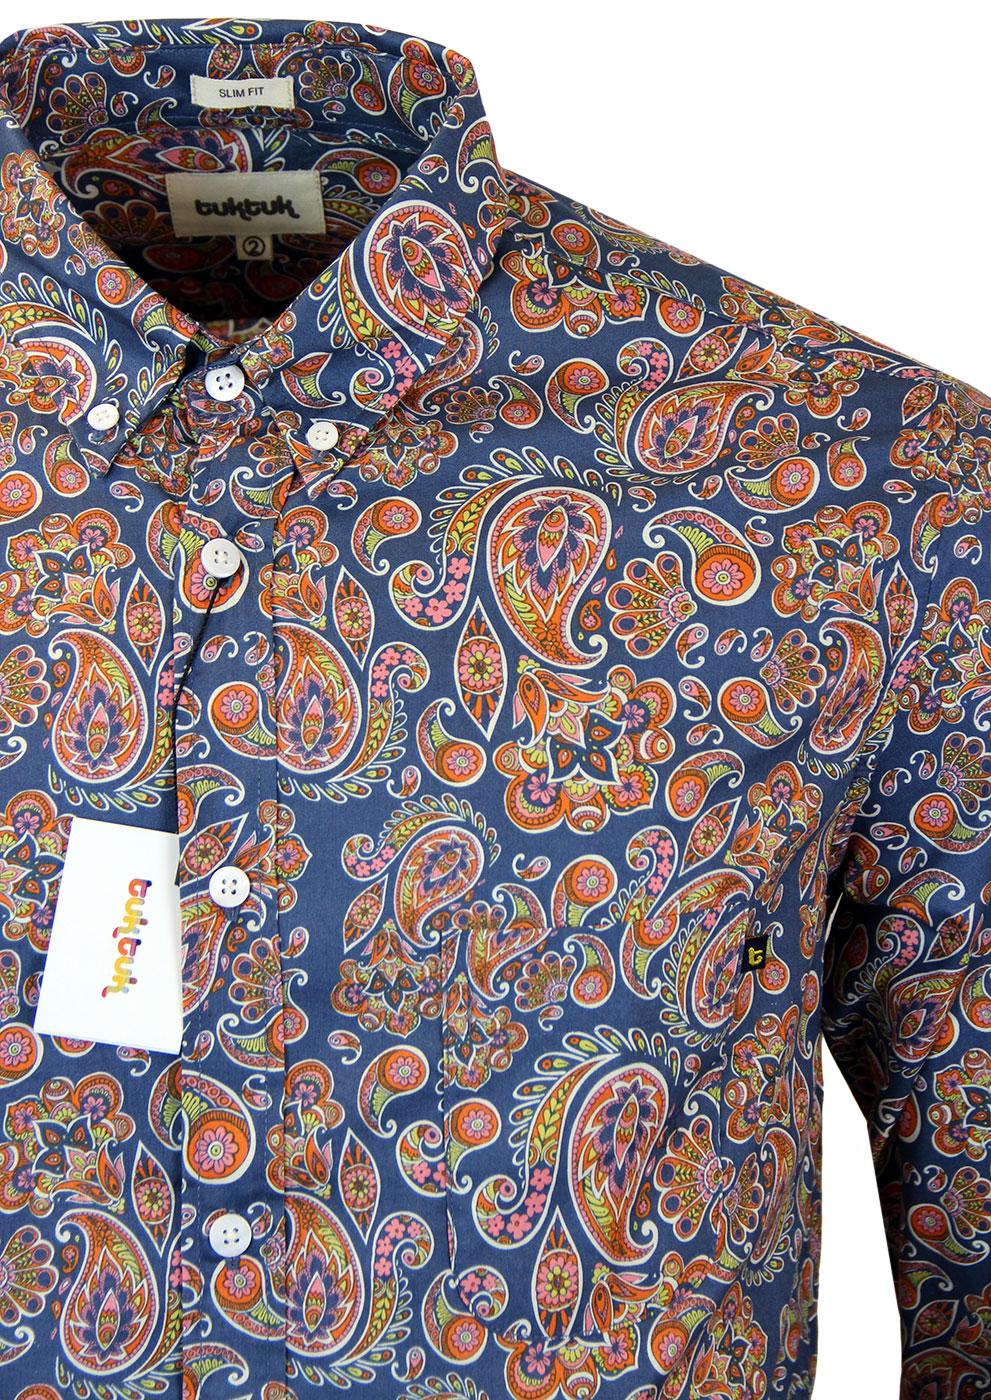 TUKTUK Retro 1960s Mod Floral Psychedelic Paisley Shirt in Blue